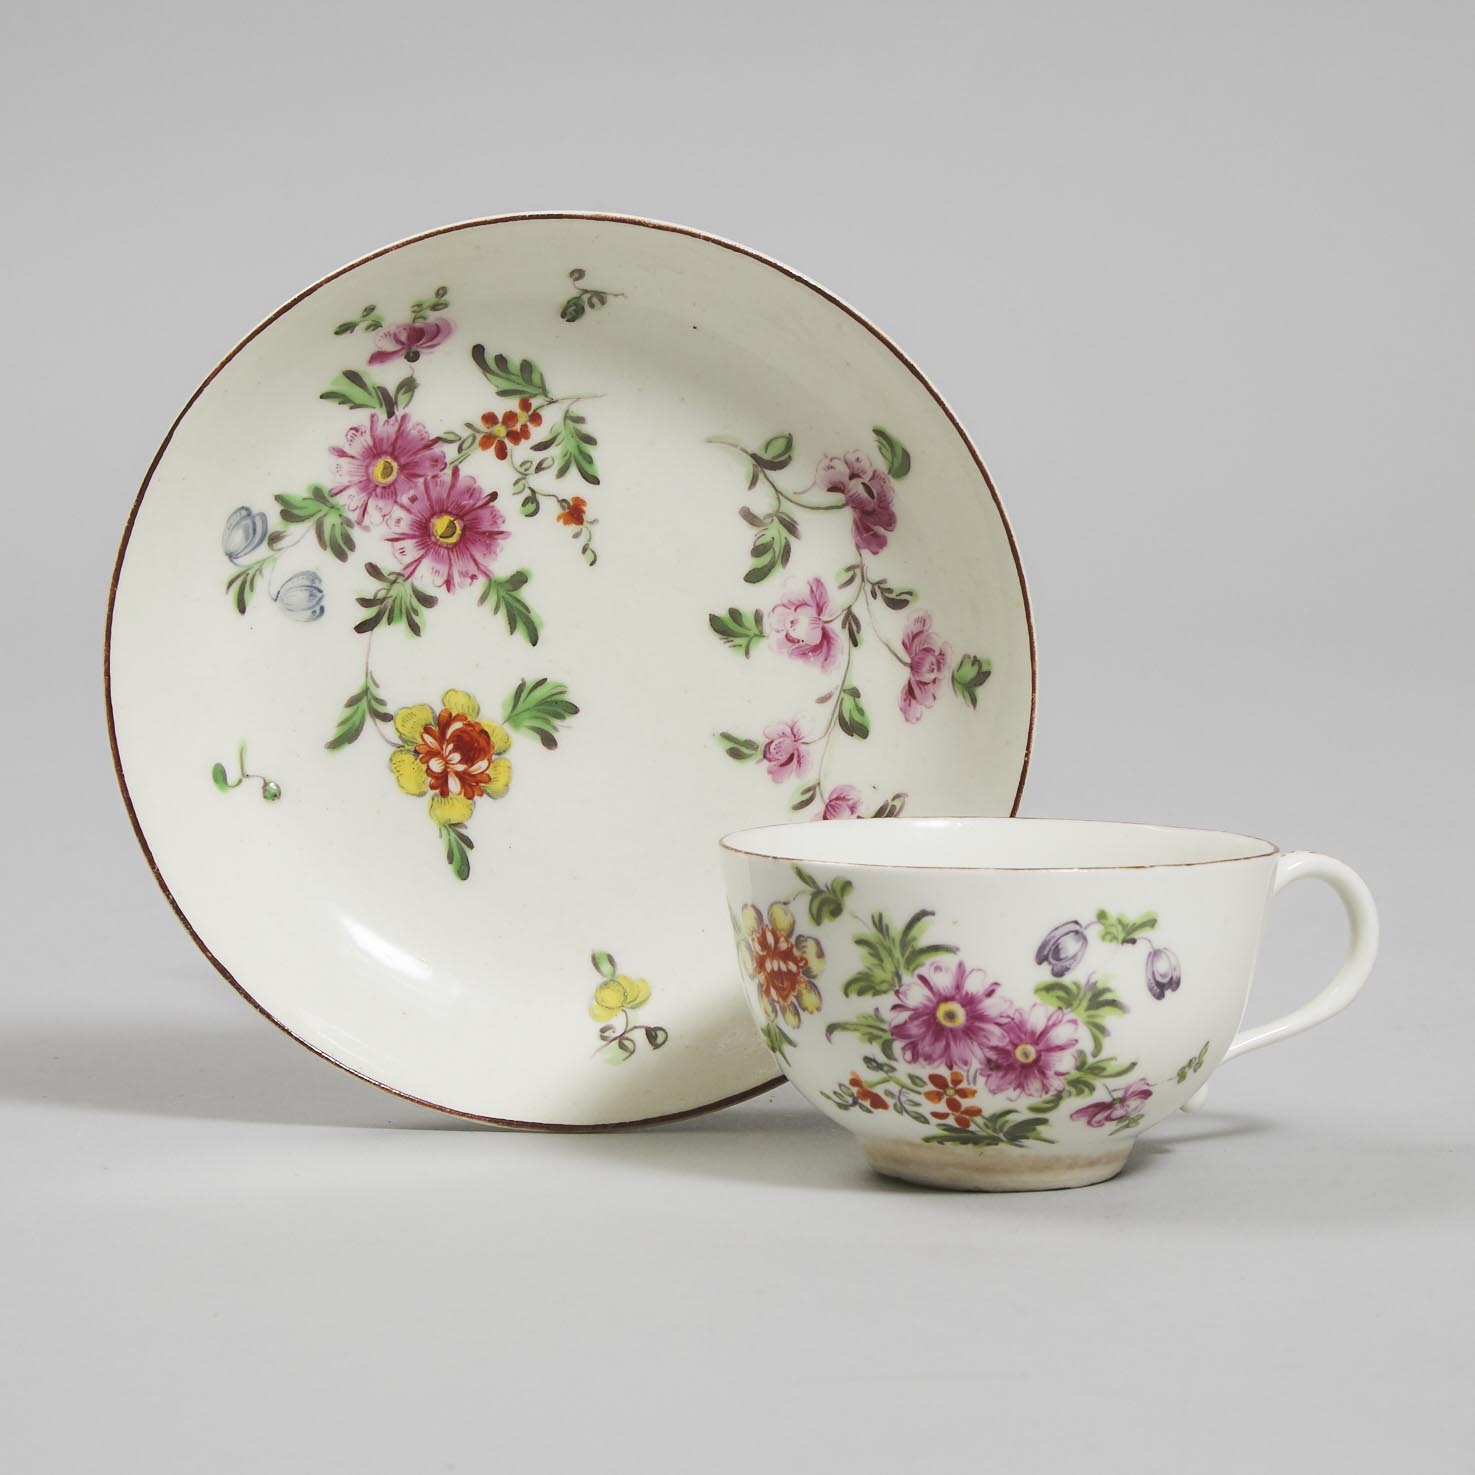 Derby Flower Painted Cup and Saucer, c.1765-70